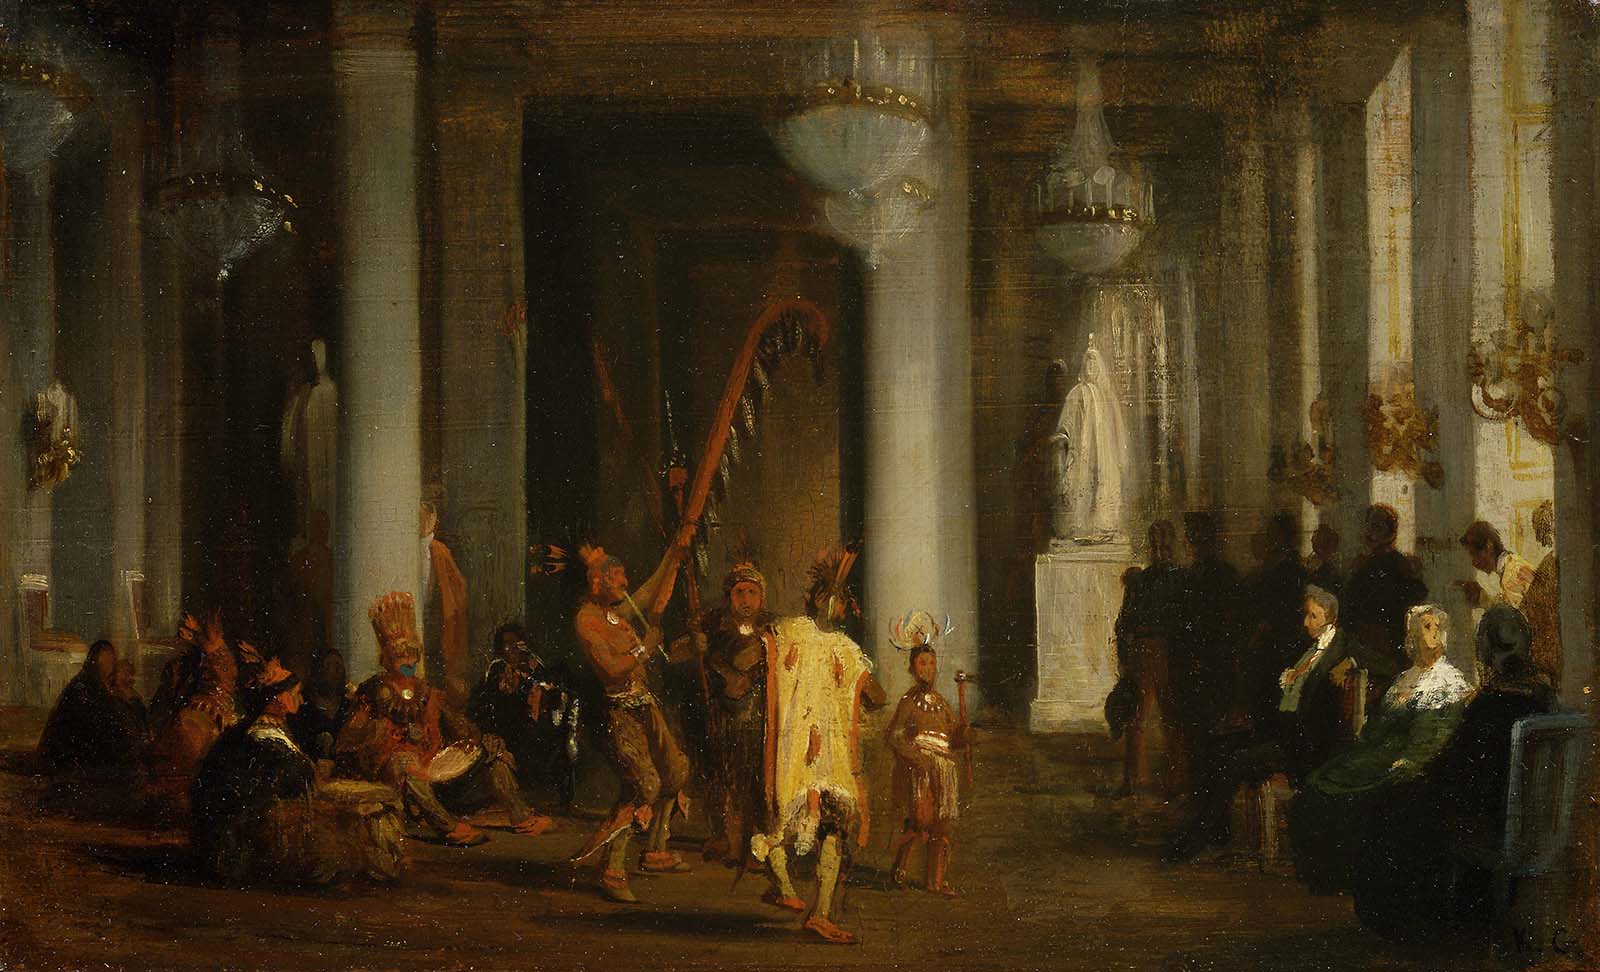 Karl Girardet (1813-1871). "Iowa Indians Performing their Dance before the King in the Galerie de la Paix at the Tuileries Palace (April 21, 1845)." Oil on board. William E. Weiss Memorial Fund Purchase. 1.91